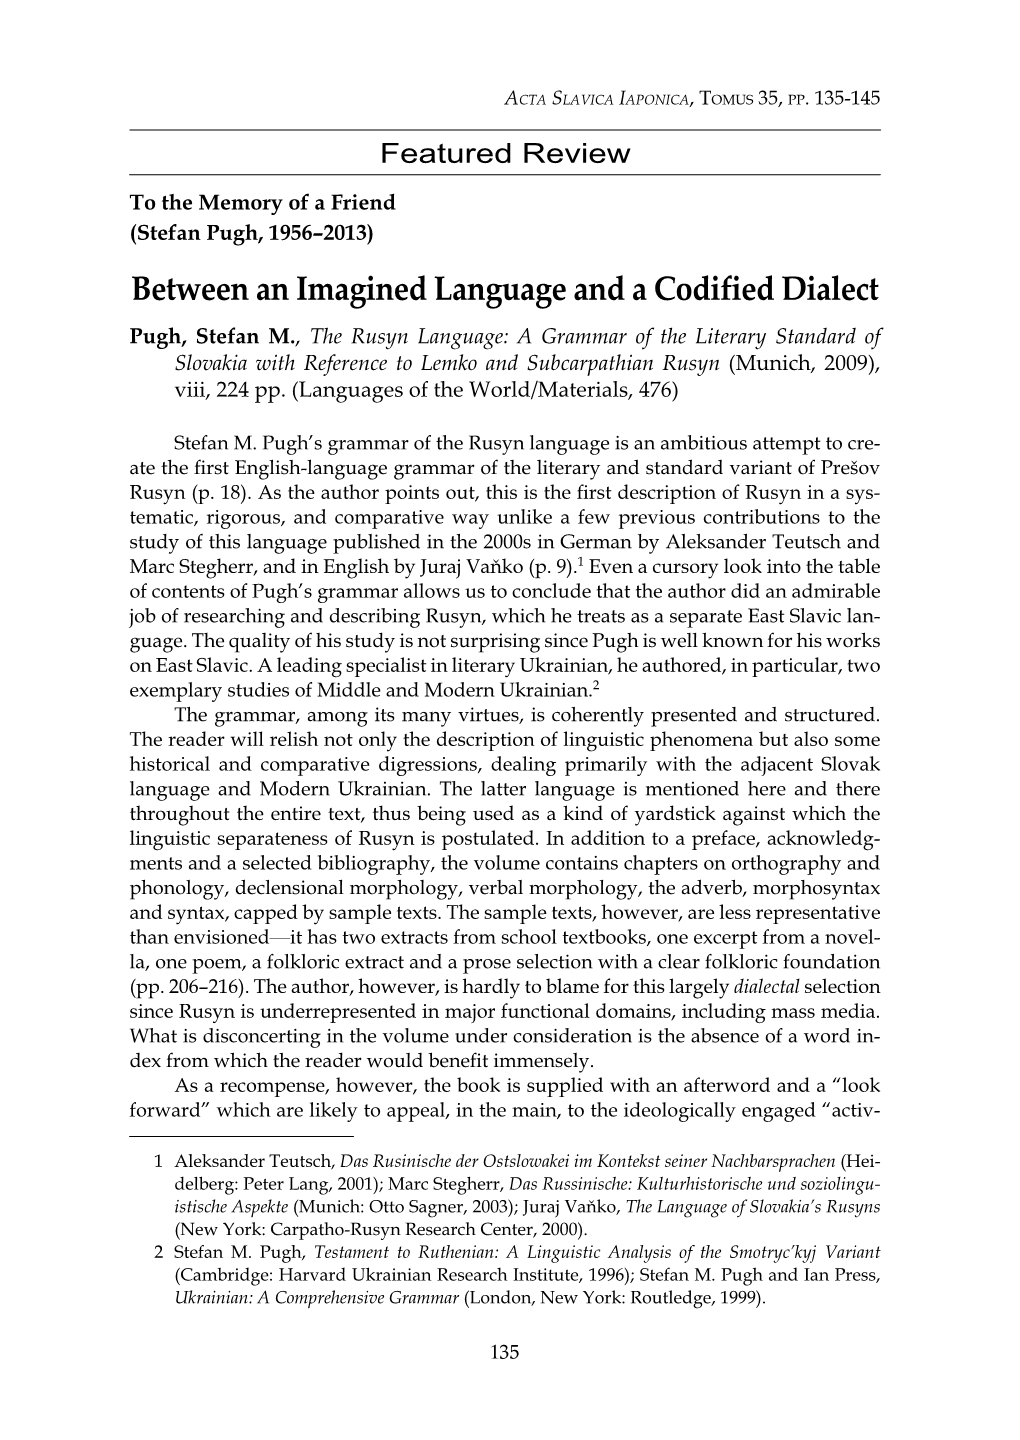 Between an Imagined Language and a Codified Dialect